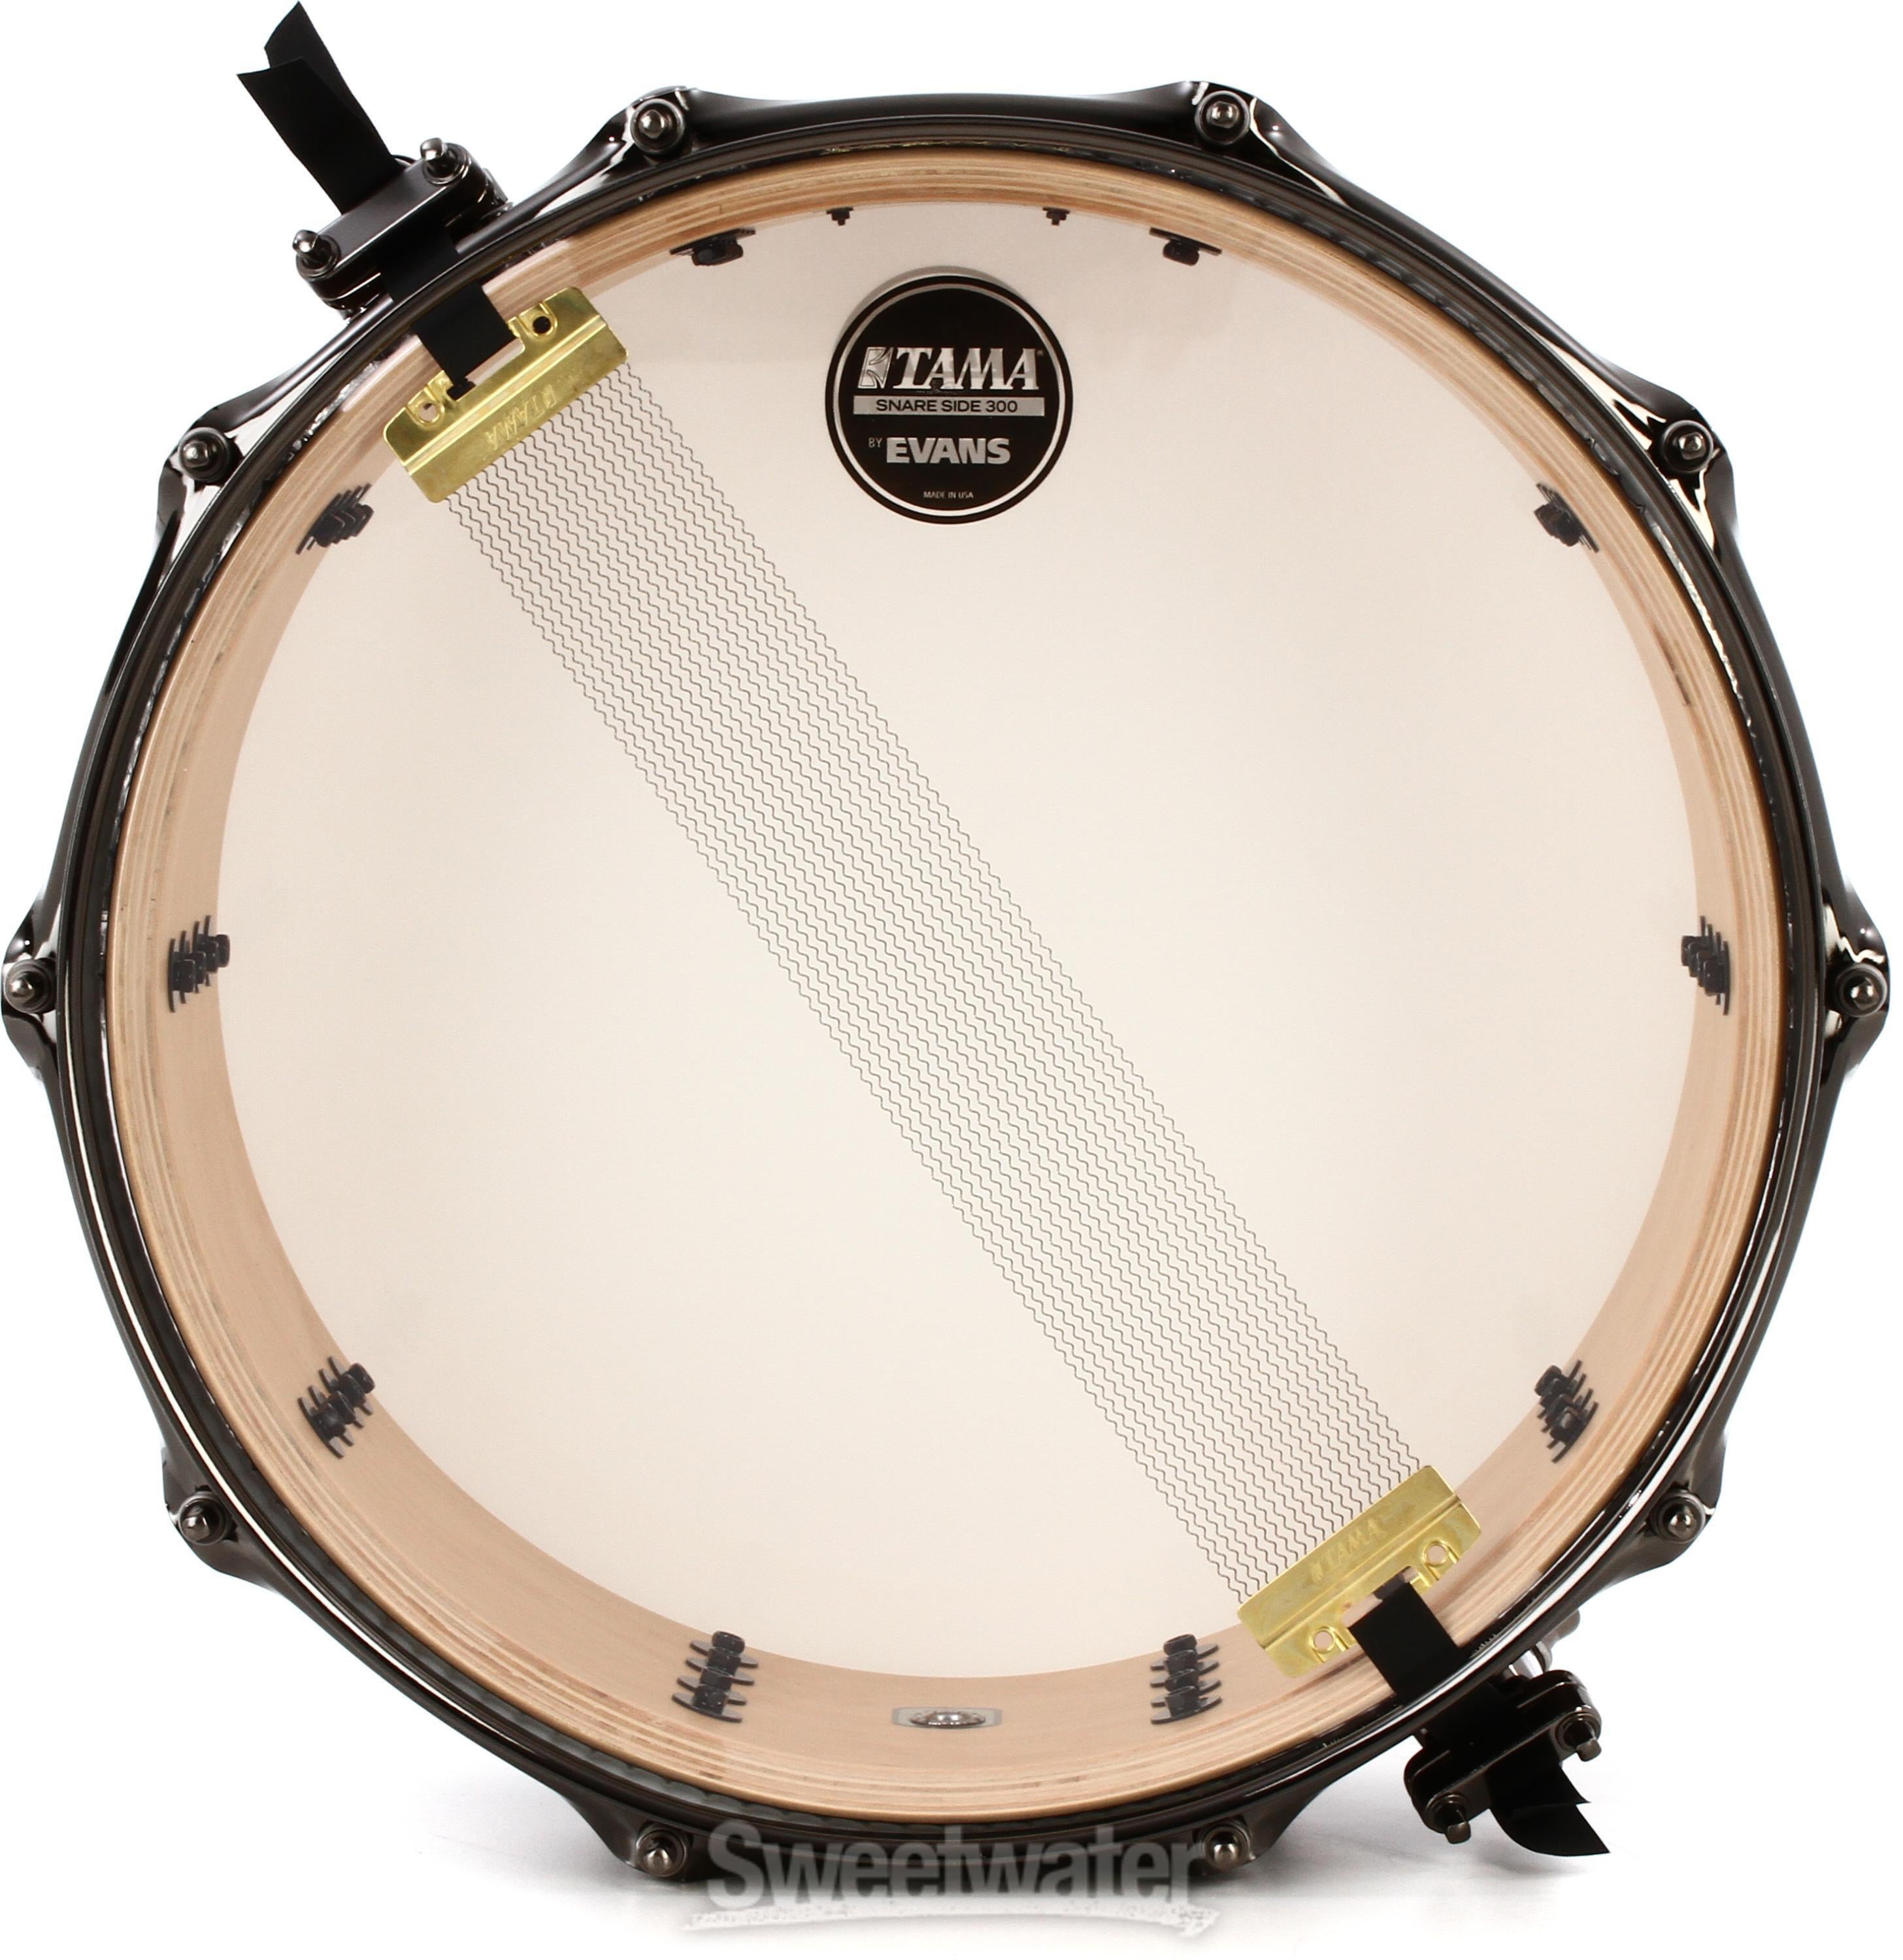 Tama S.L.P. G-Maple Snare Drum - 6 x 14 inch | Sweetwater